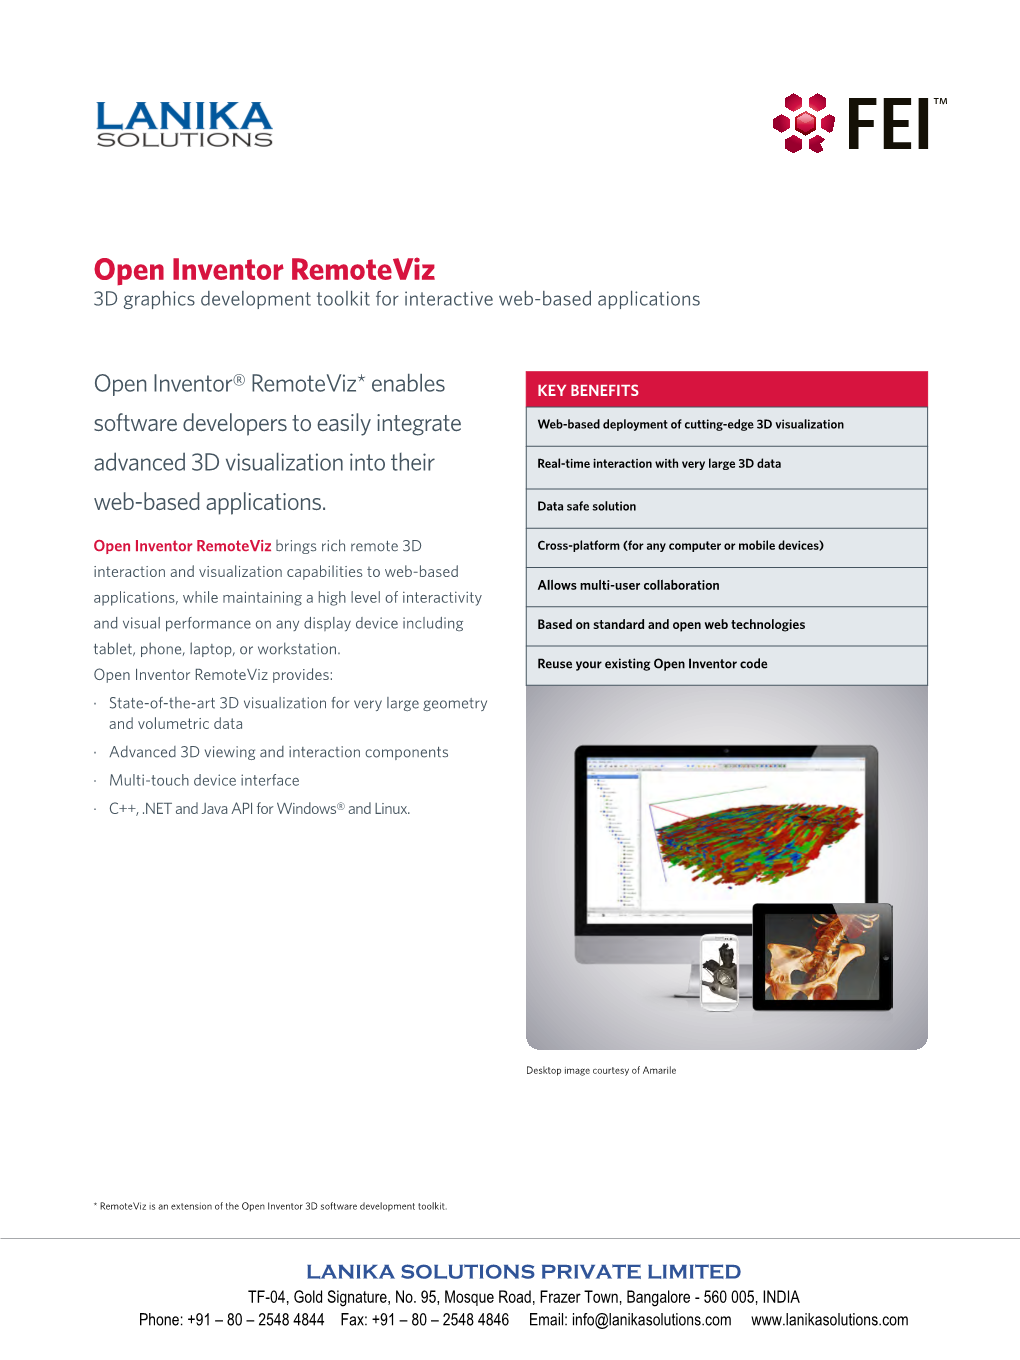 Open Inventor Remoteviz 3D Graphics Development Toolkit for Interactive Web-Based Applications